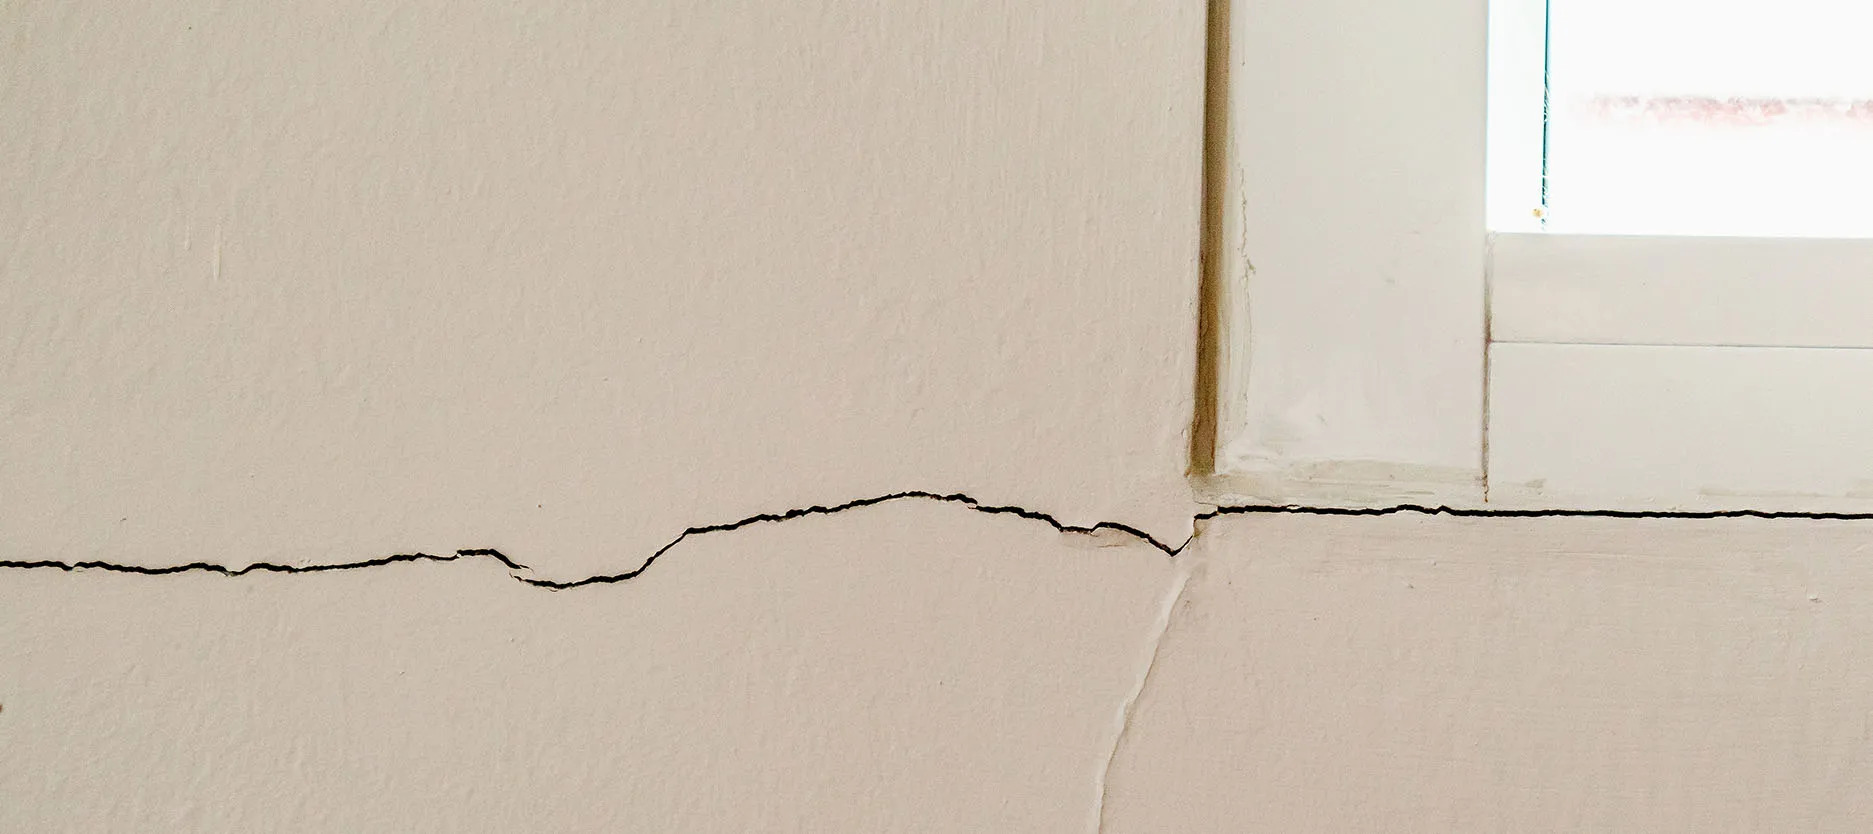 Crack bridging - Paint should protect walls from cracks image